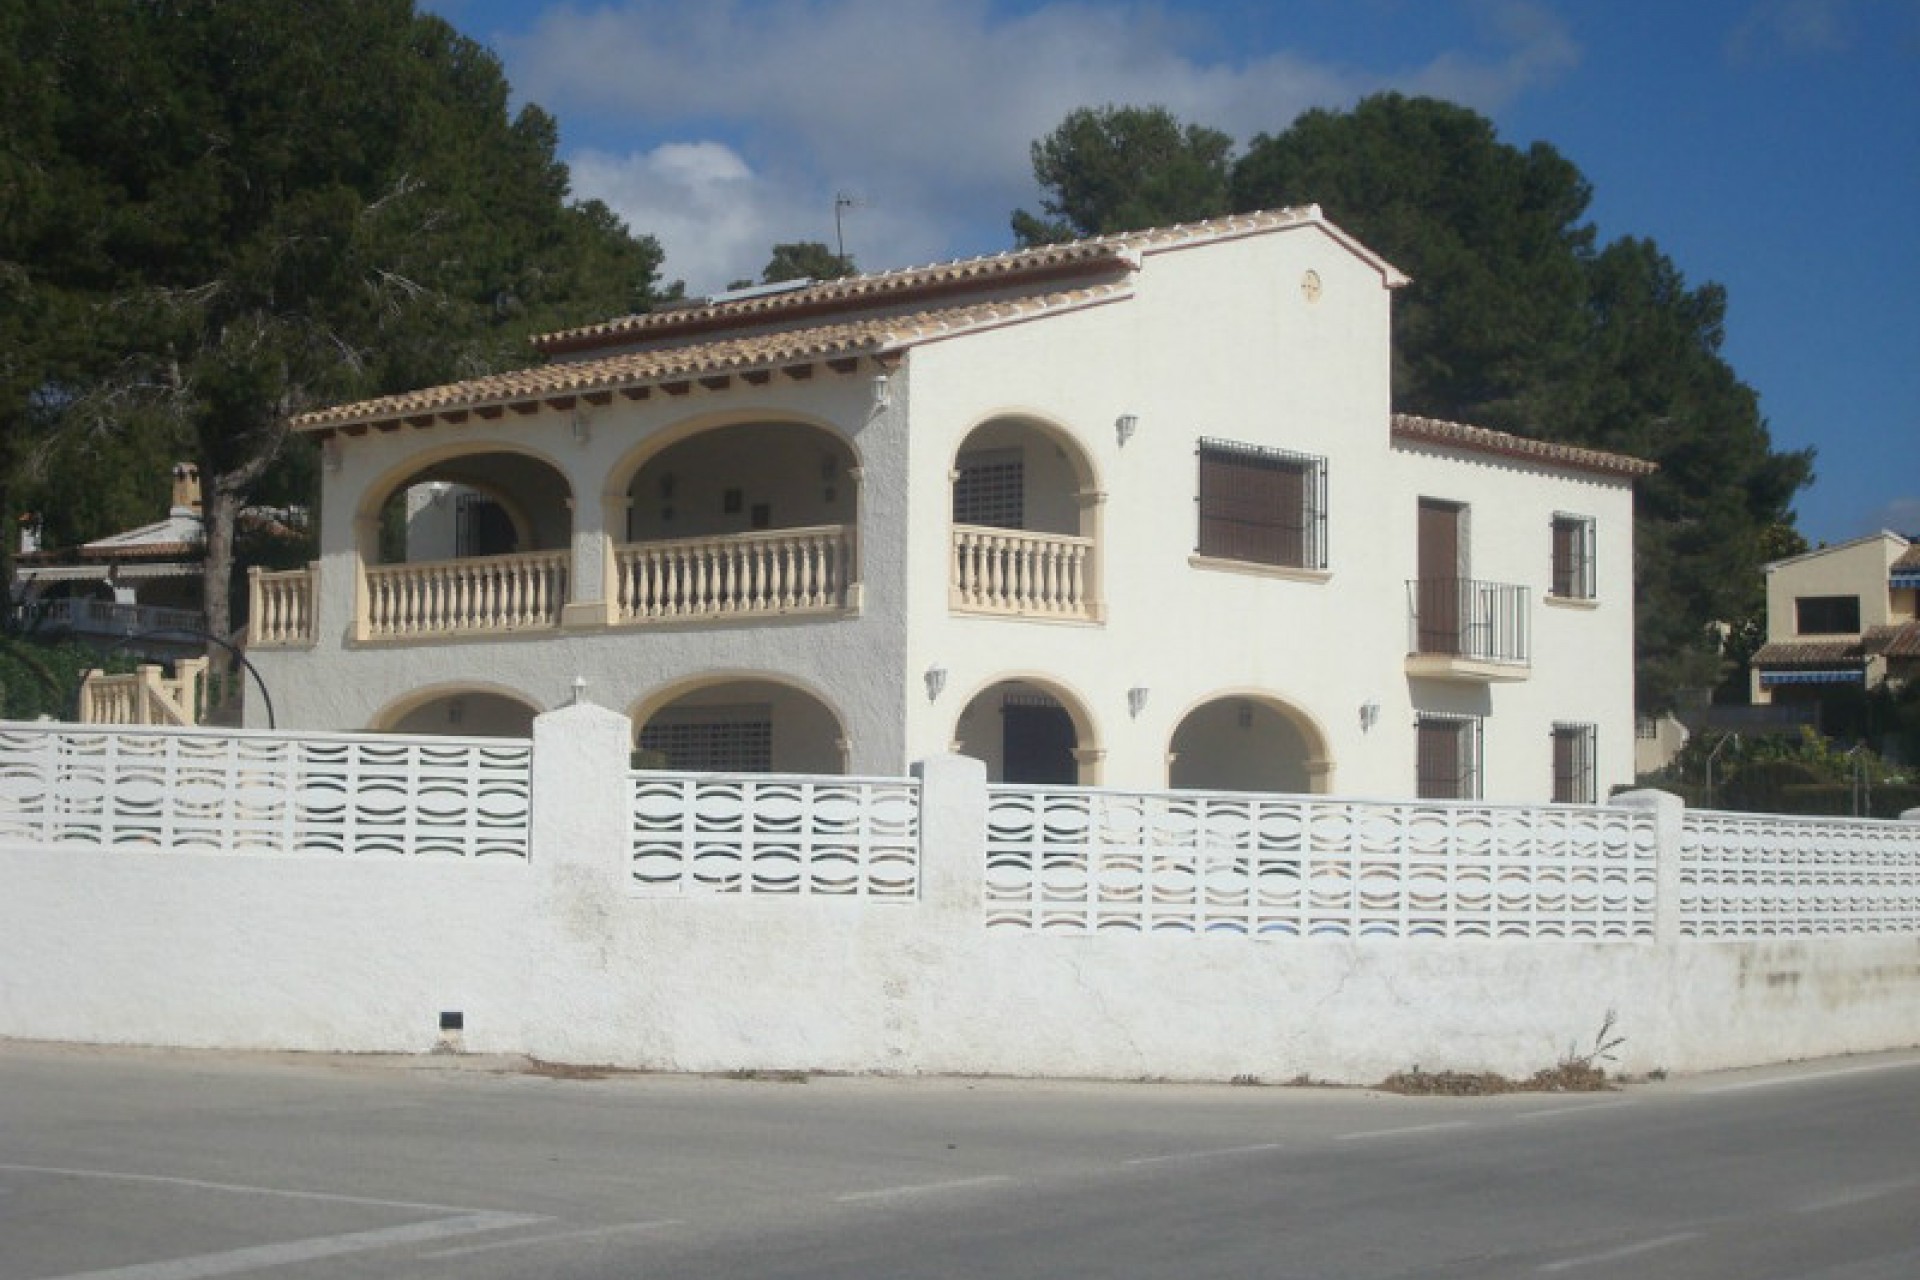 Villa for sale in Moraira, flat walk to town and beach